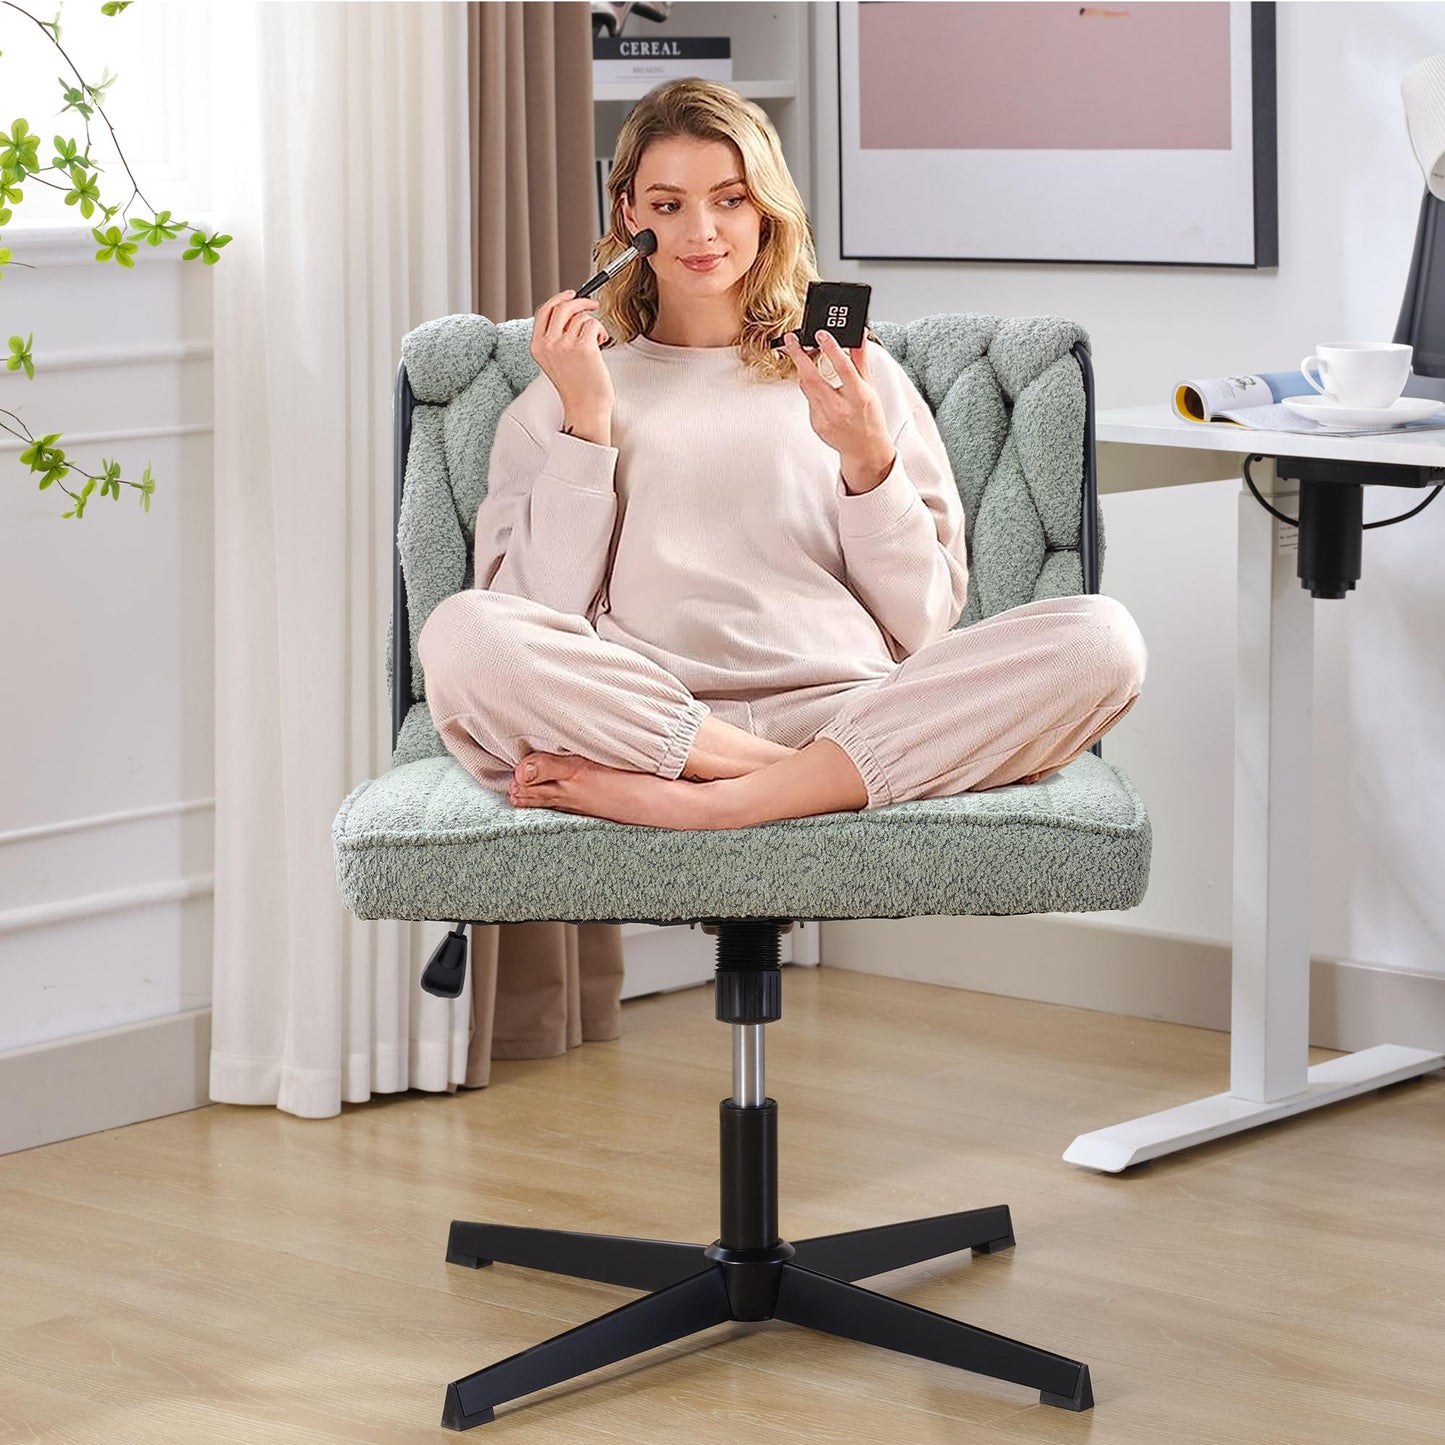 Armless Office Chair no Wheels, Ergonomic Wide Seat Swivel Desk Chair, Height Adjustable Cross Legged Comfortable Computer Chair for Living Room, Van